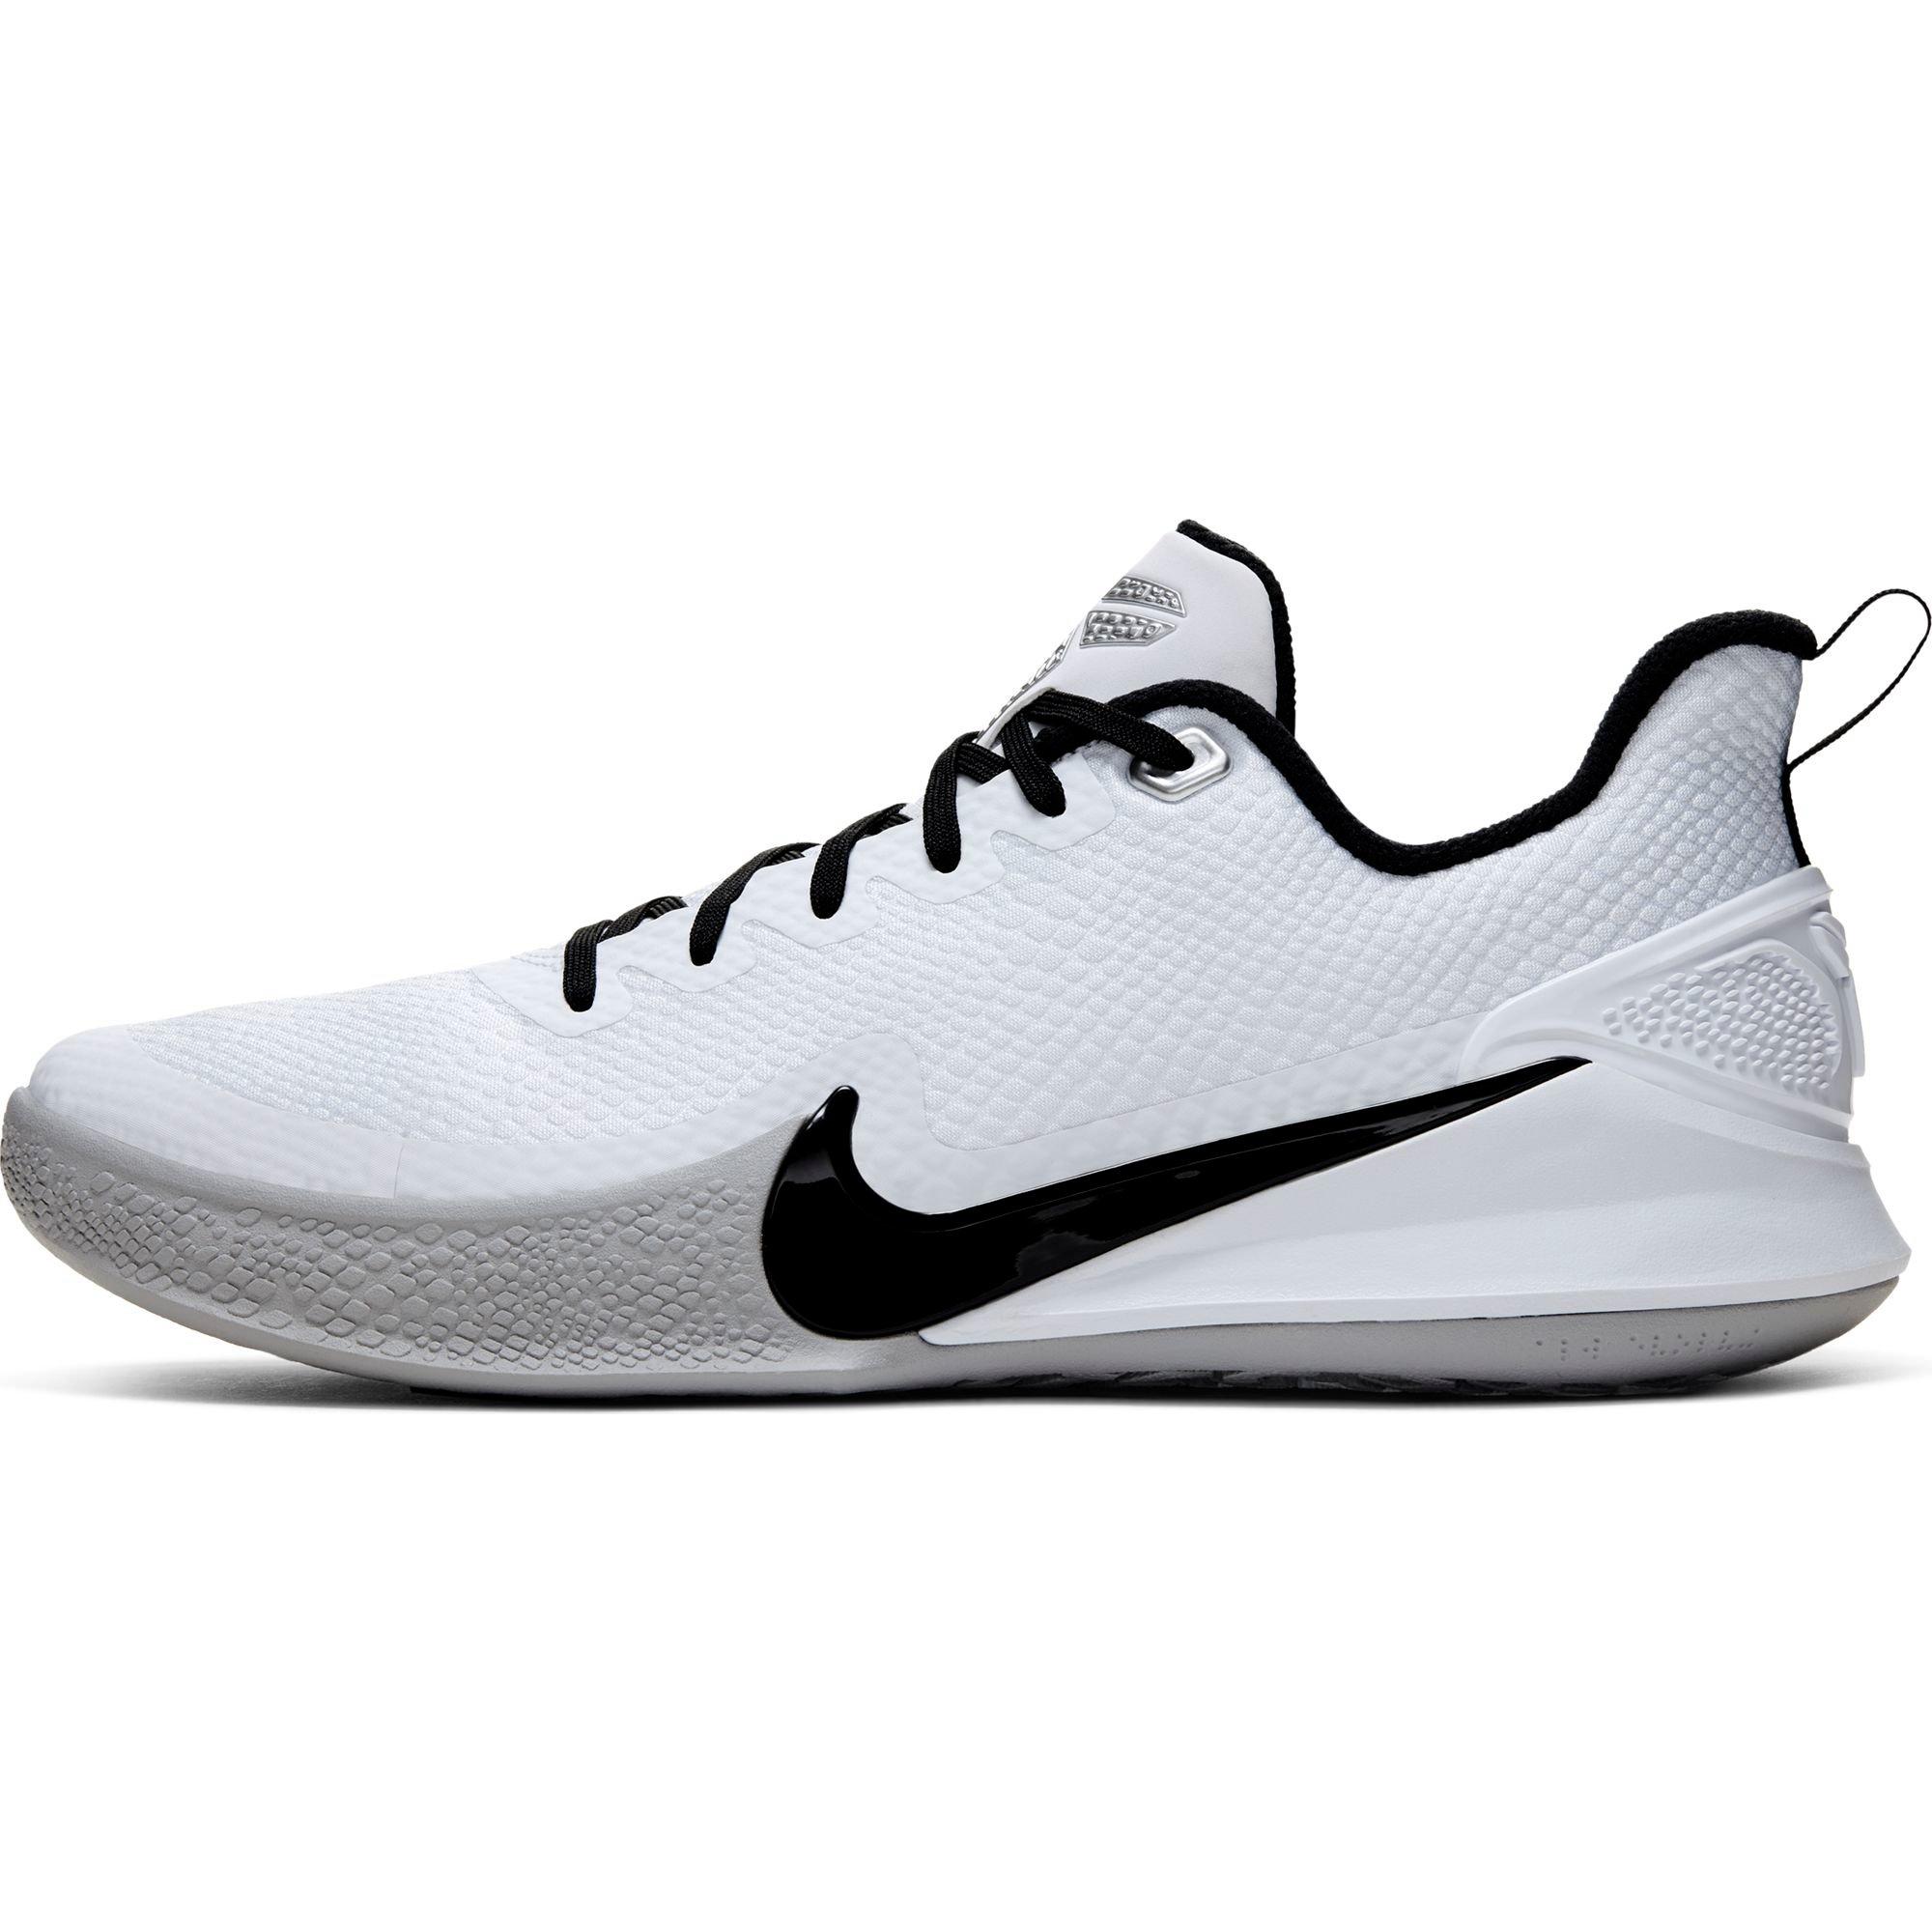 kobe volleyball shoes